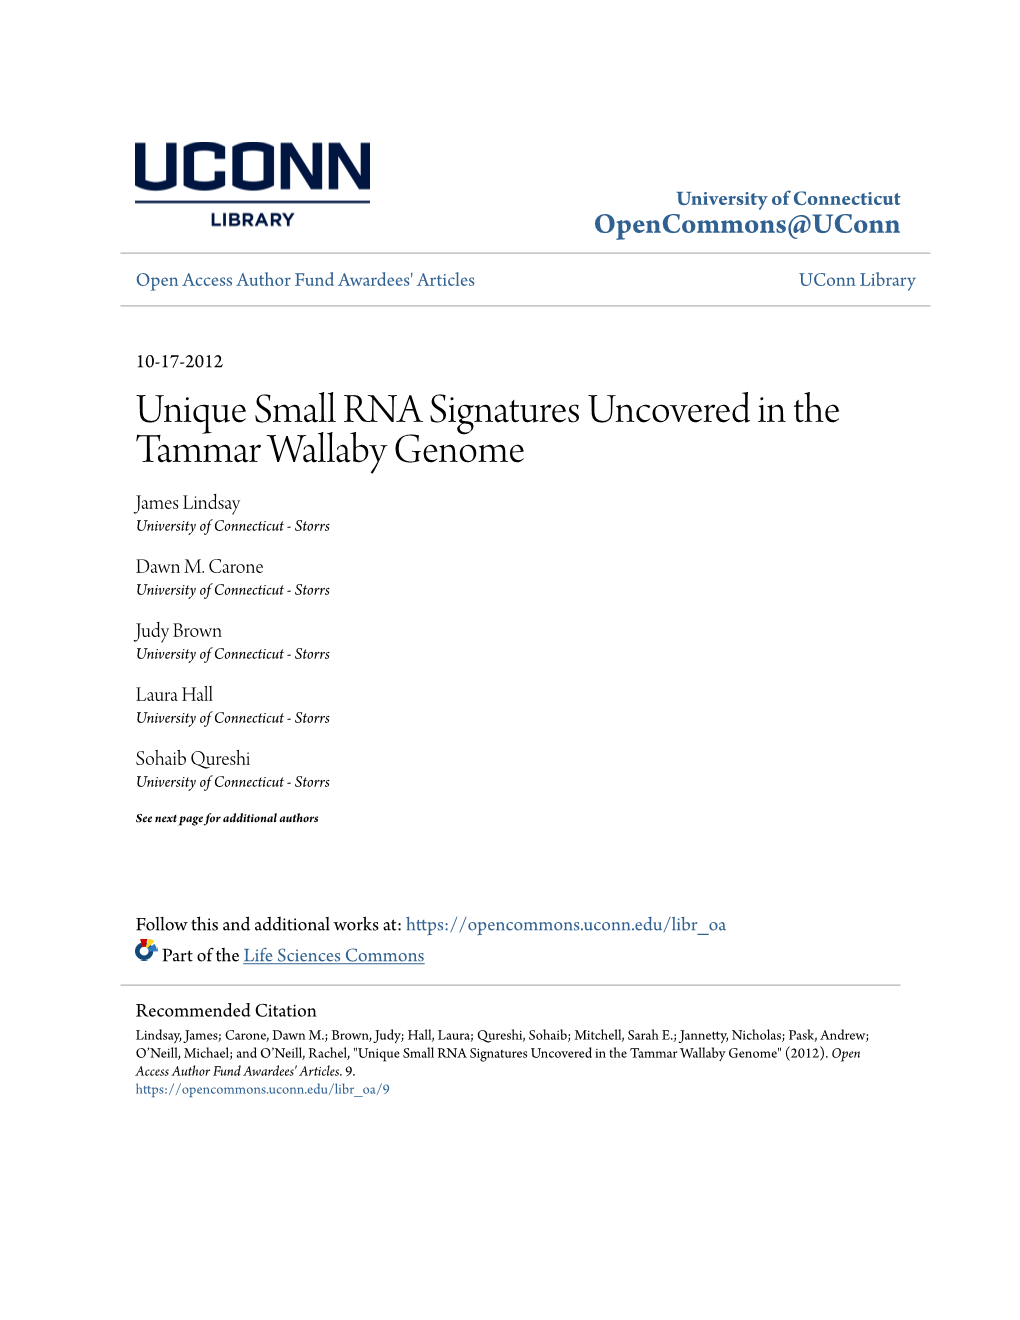 Unique Small RNA Signatures Uncovered in the Tammar Wallaby Genome James Lindsay University of Connecticut - Storrs